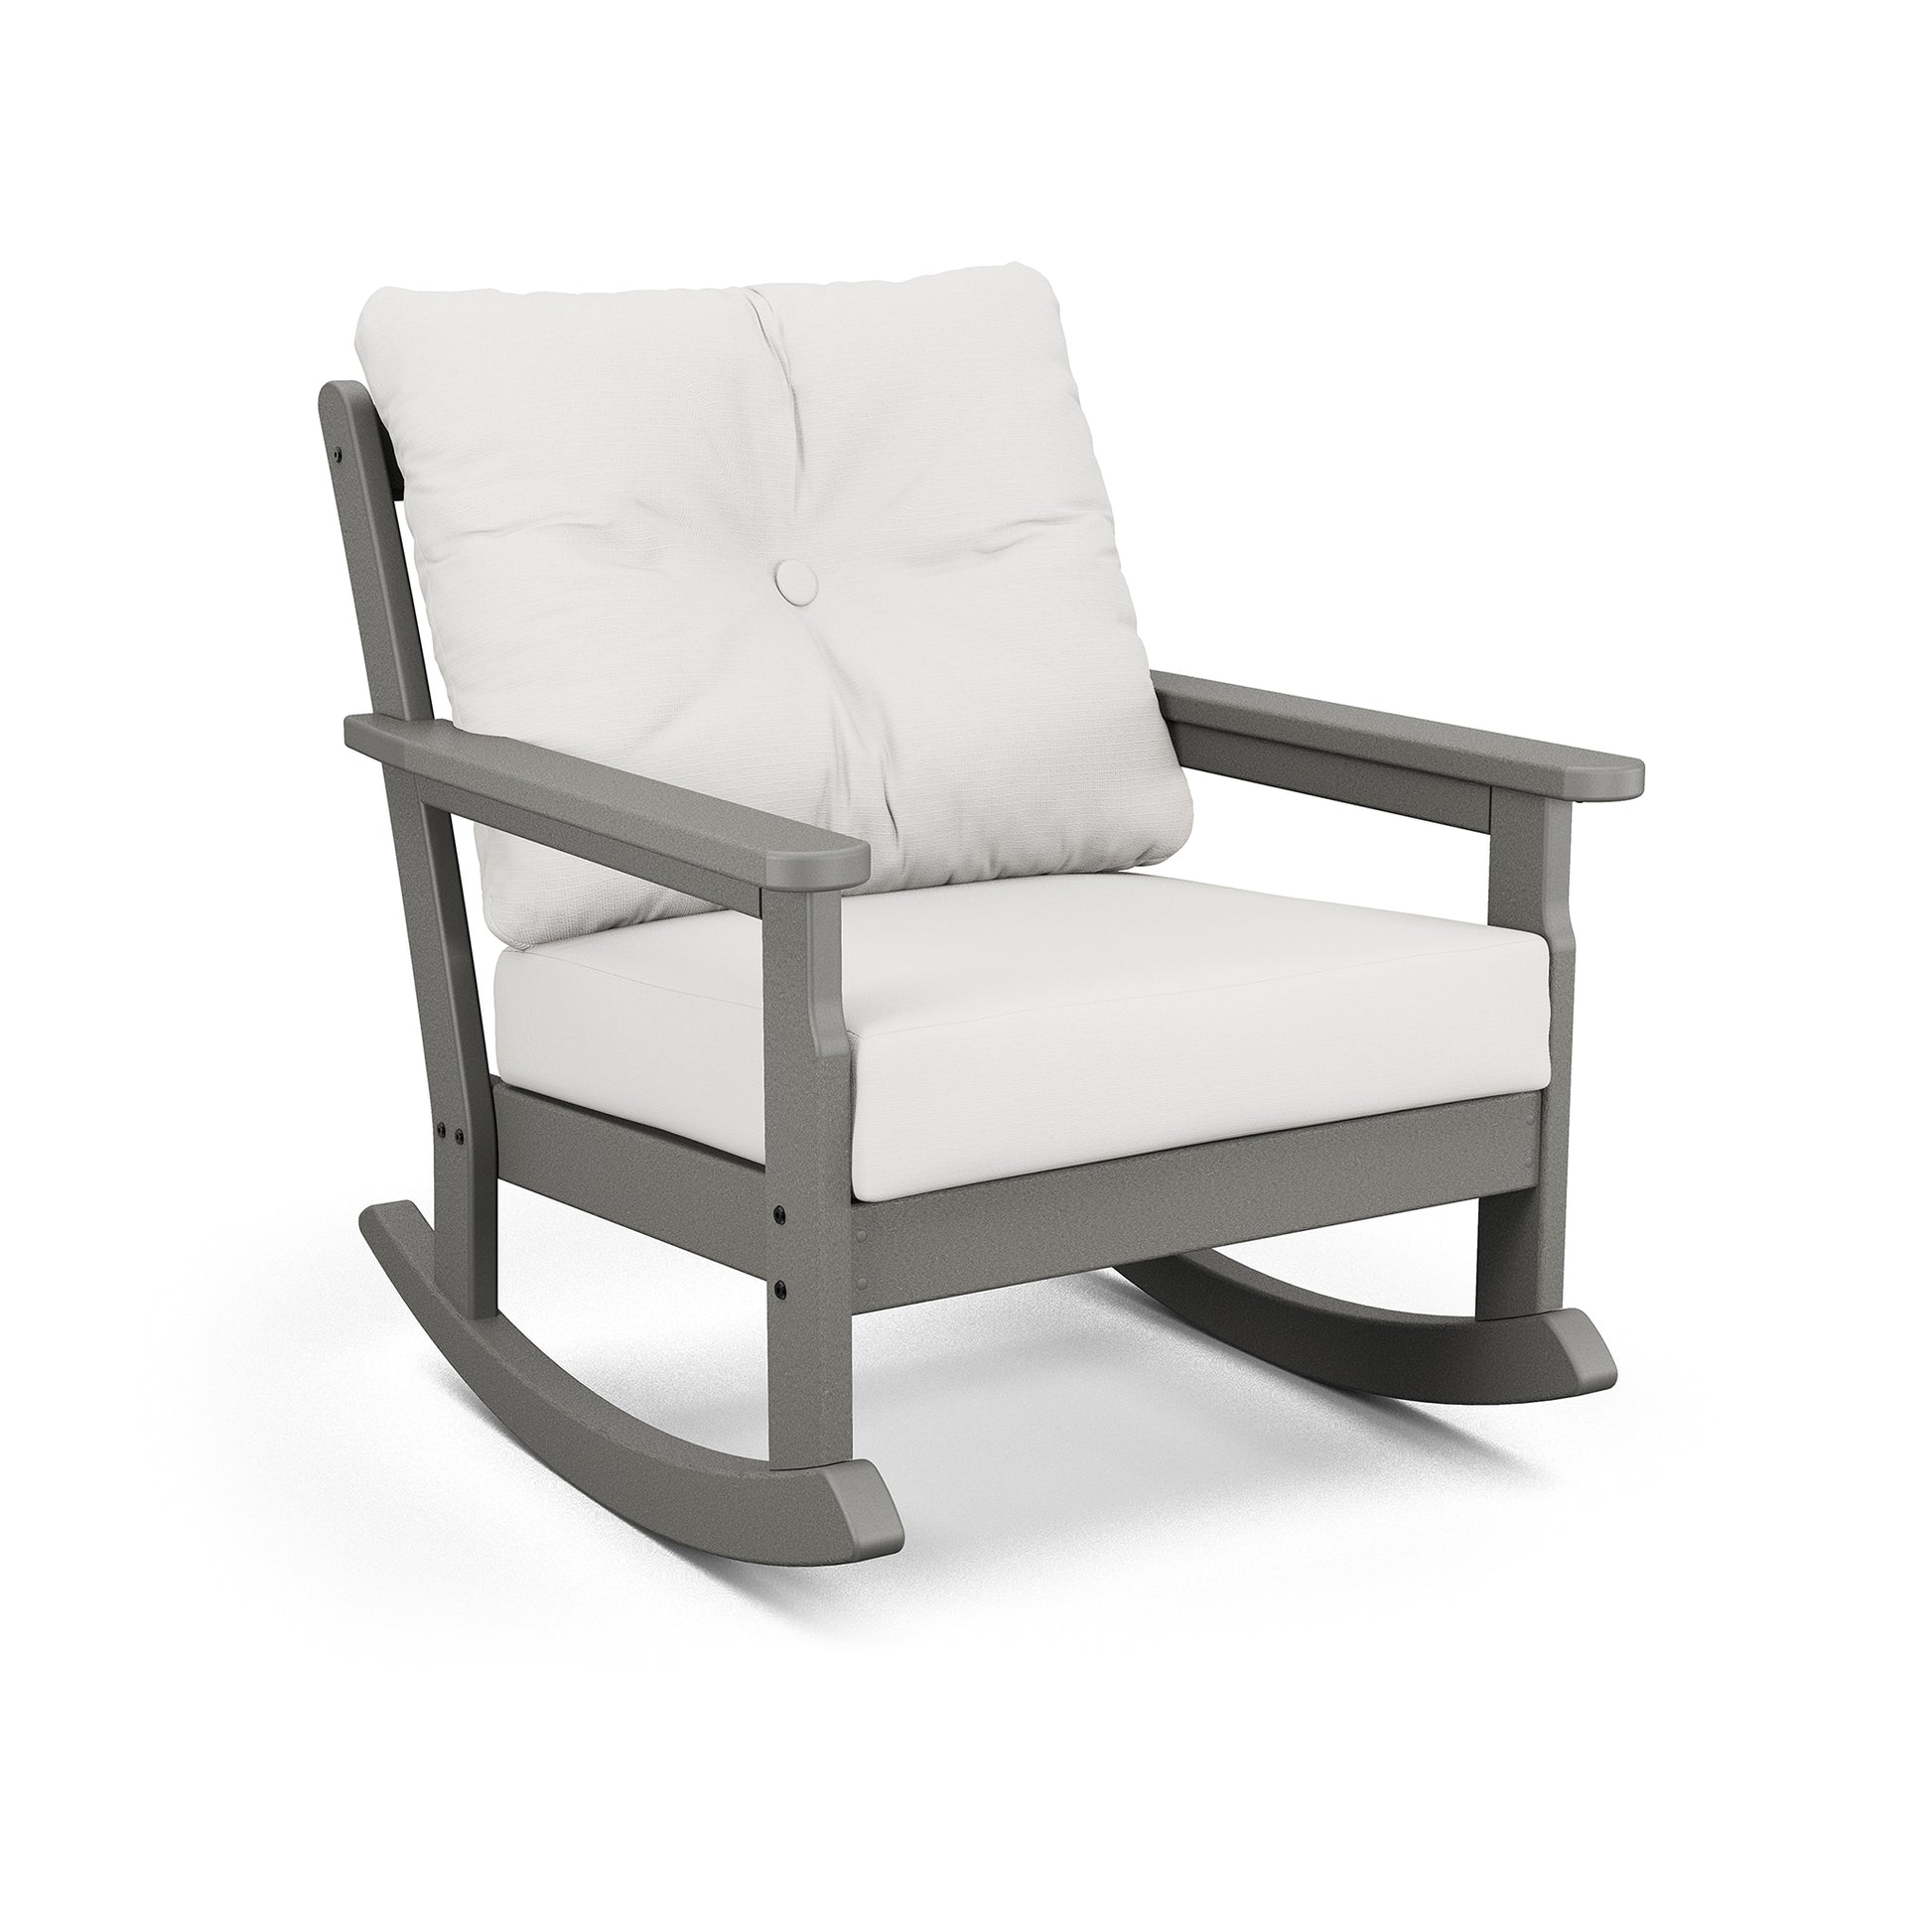 A modern gray POLYWOOD Vineyard Deep Seating Rocking Chair featuring a white all-weather fabric cushion on both the seat and backrest, isolated on a white background.